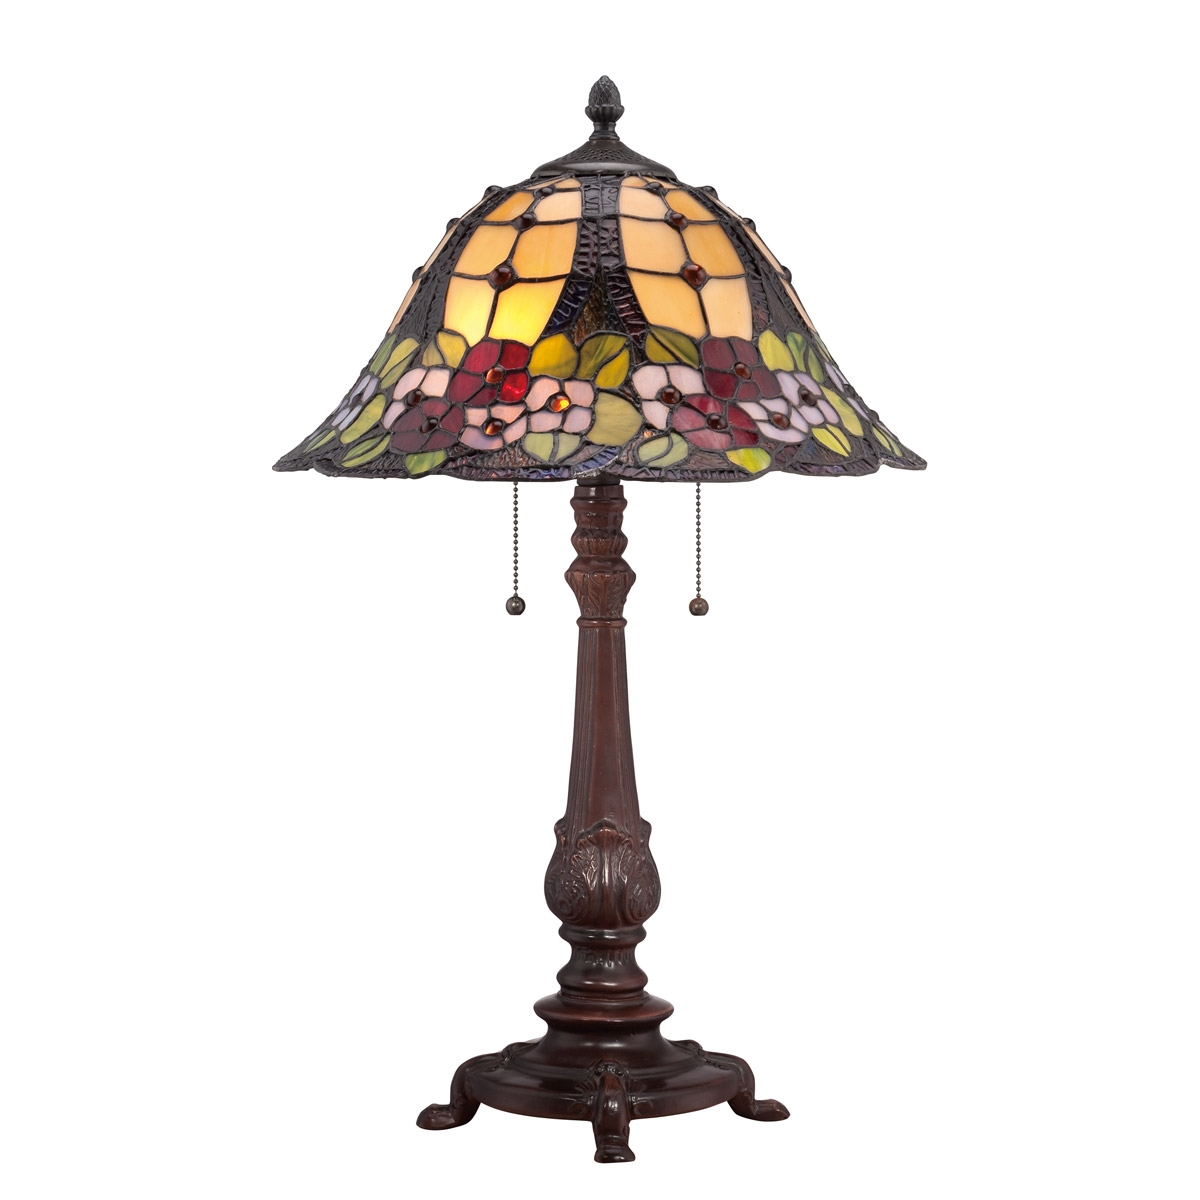 Quoizel Lighting Tiffany 2 Light Table Lamp in Russet TF1489TRS l